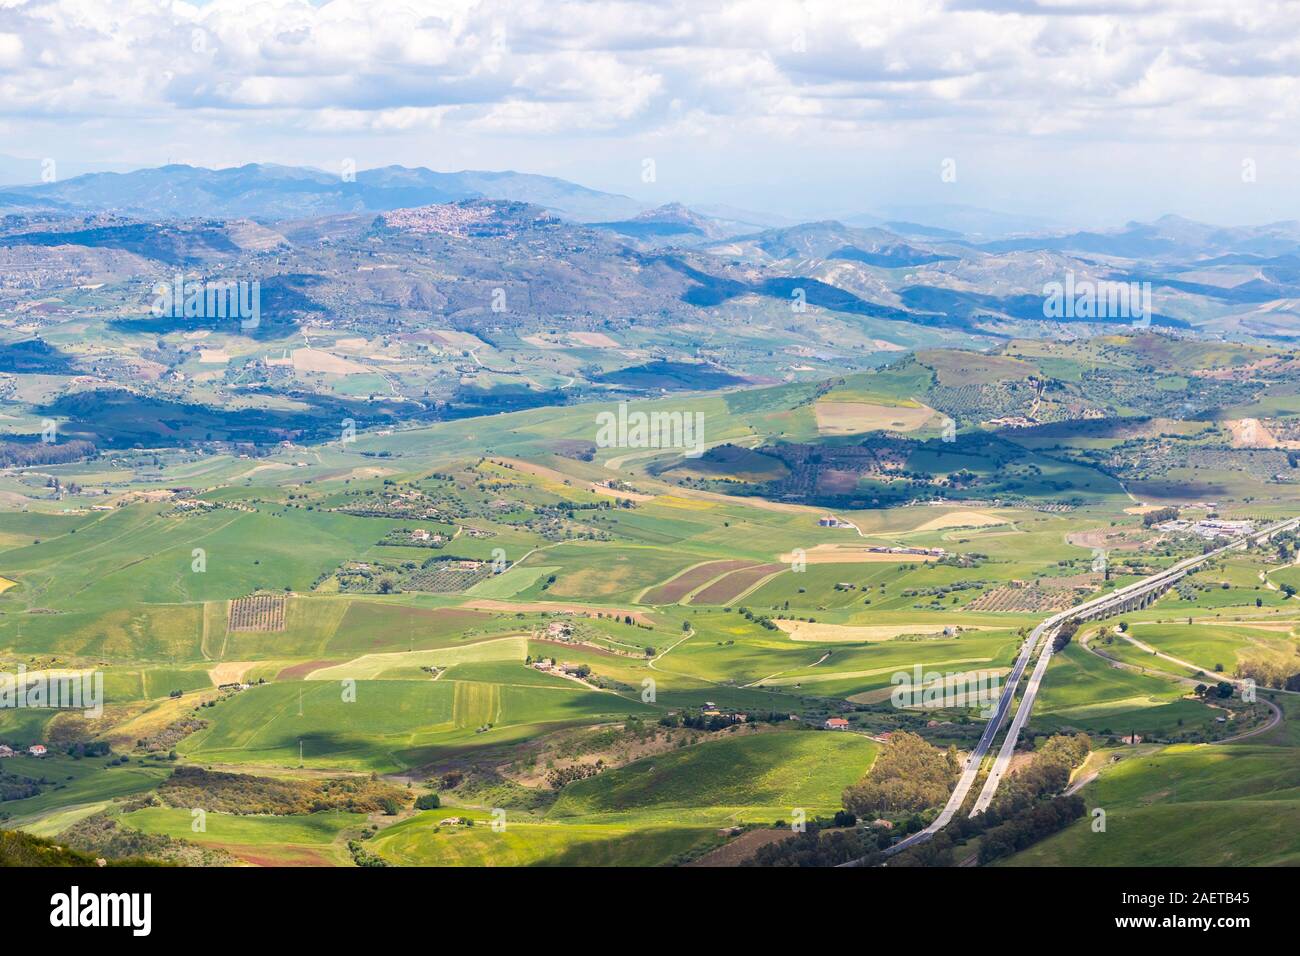 Picturesque green hilly valley near Enna city, central Sicily, Italy. The Autostrada A19 from Catania to Palermo on the background. Aerial view Stock Photo